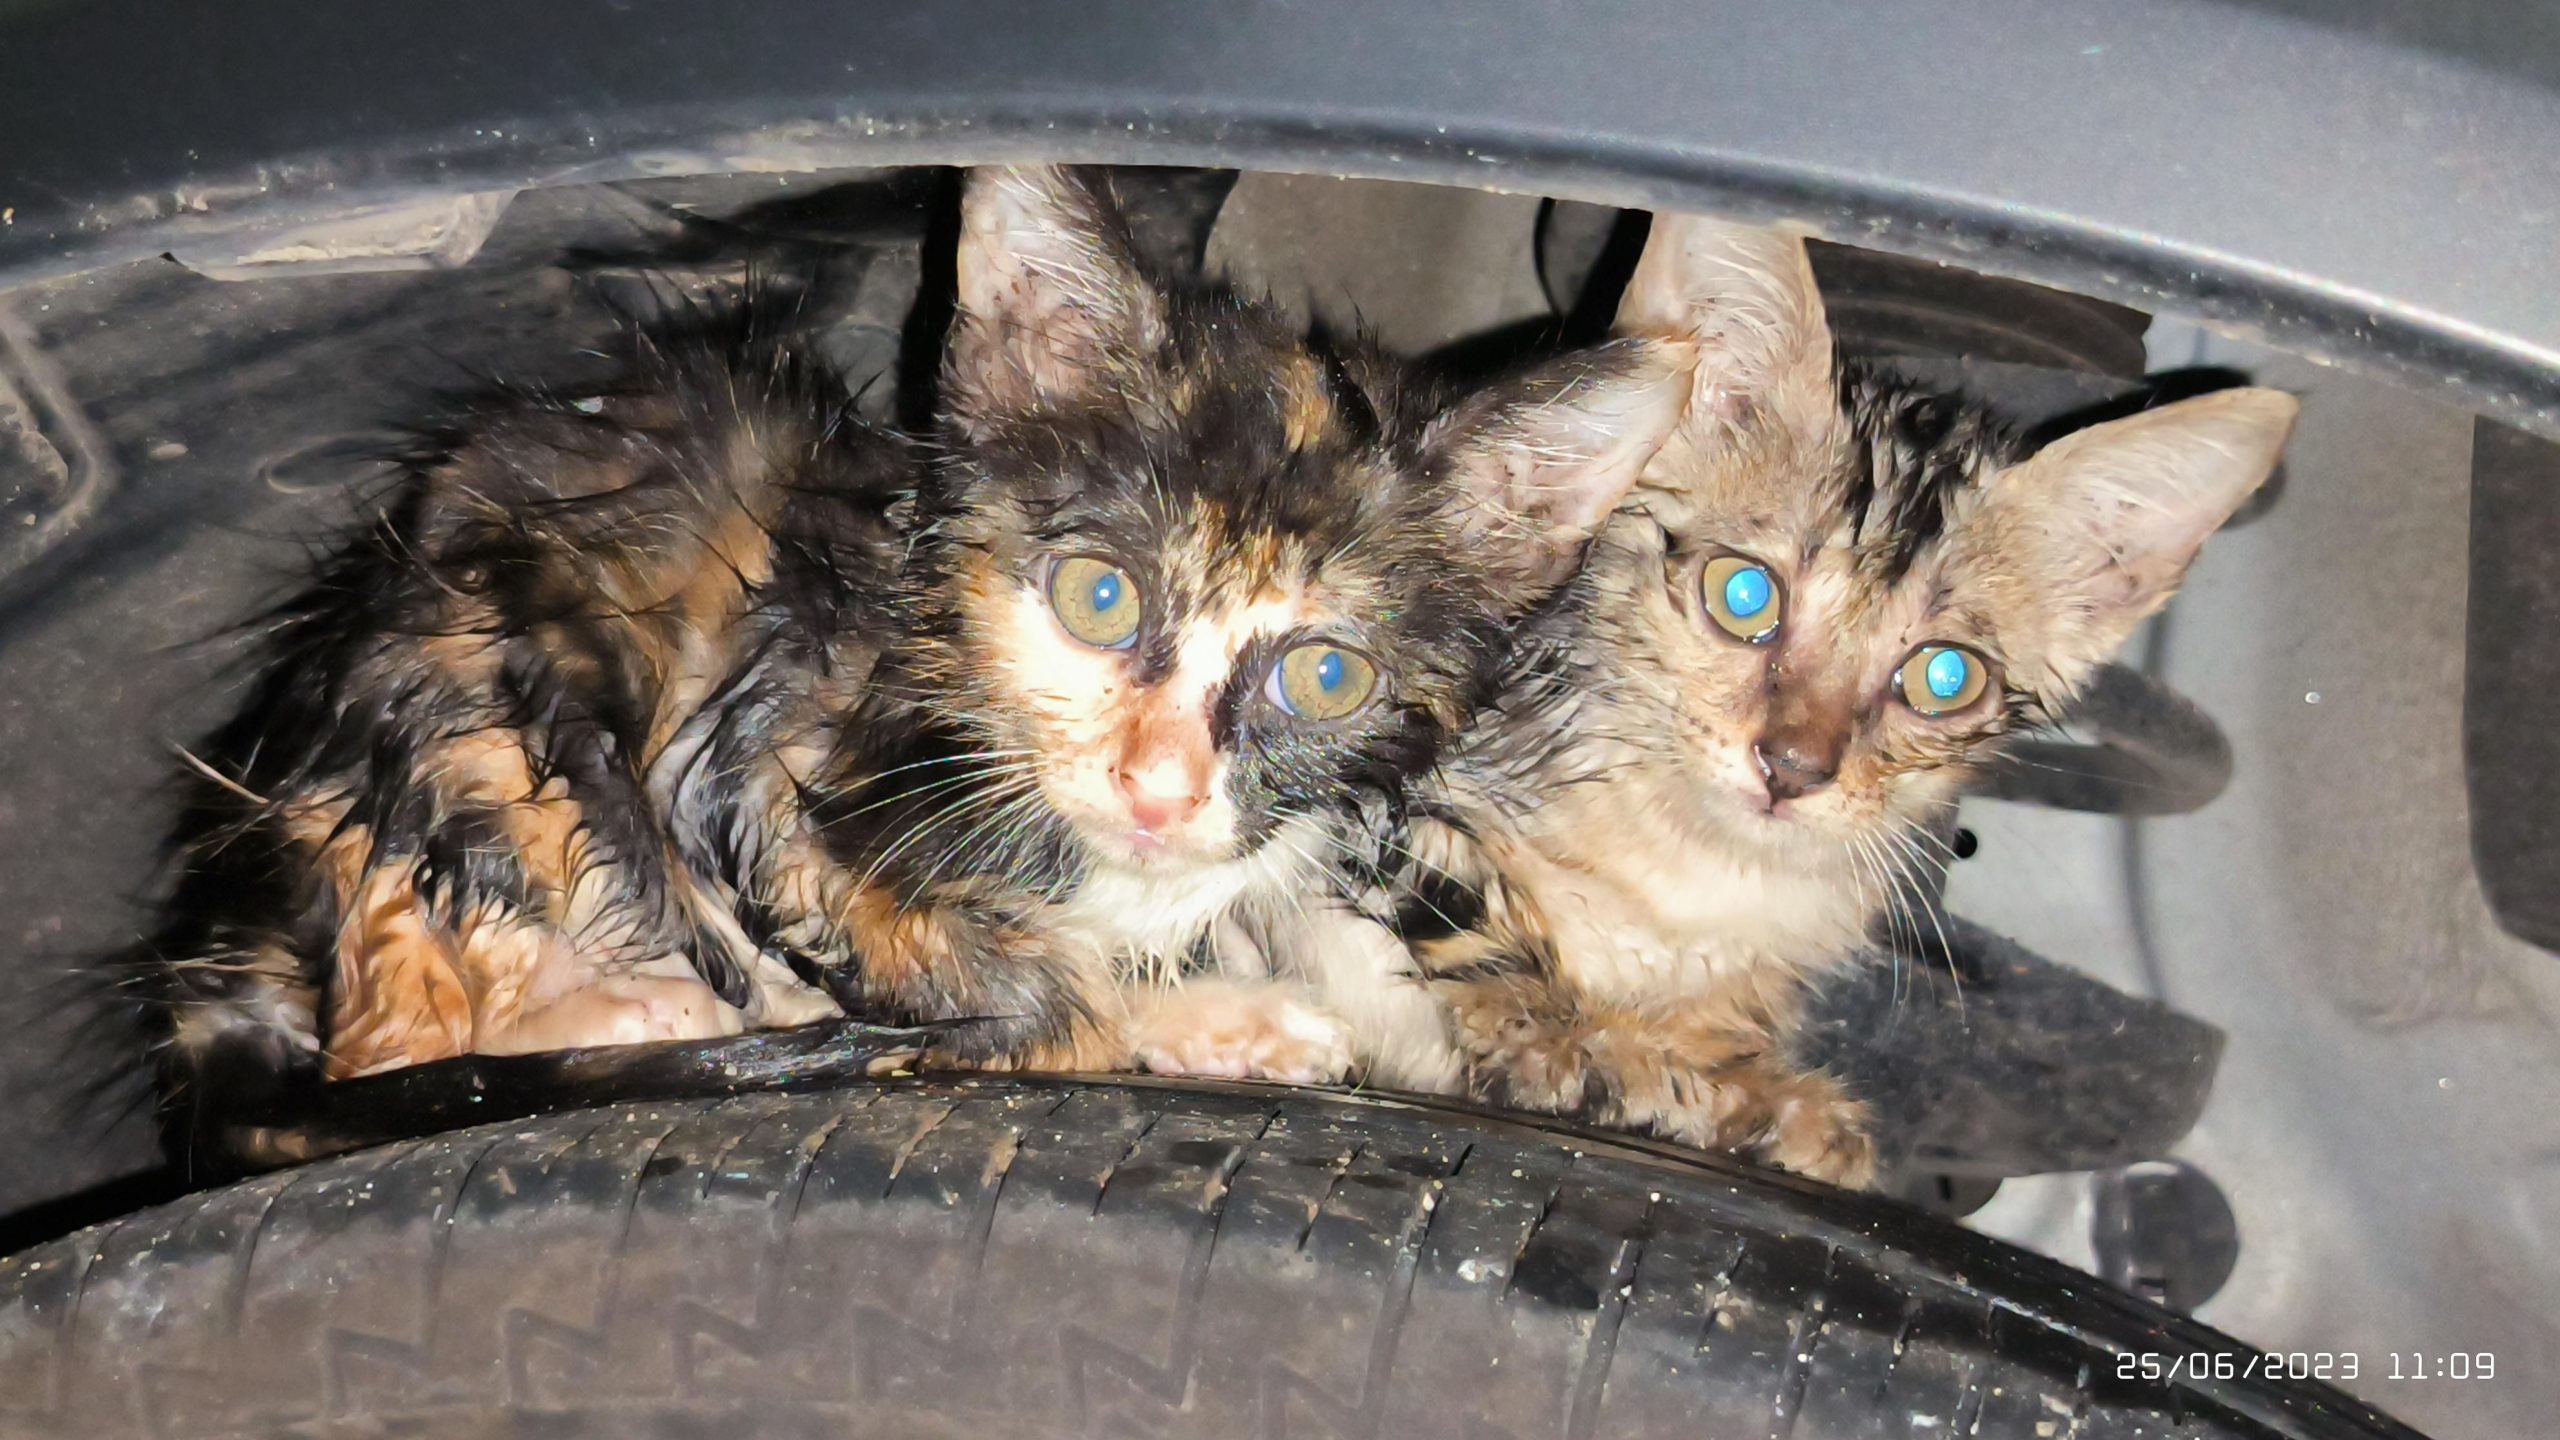 The terrible kittens are attempting to search out shelter